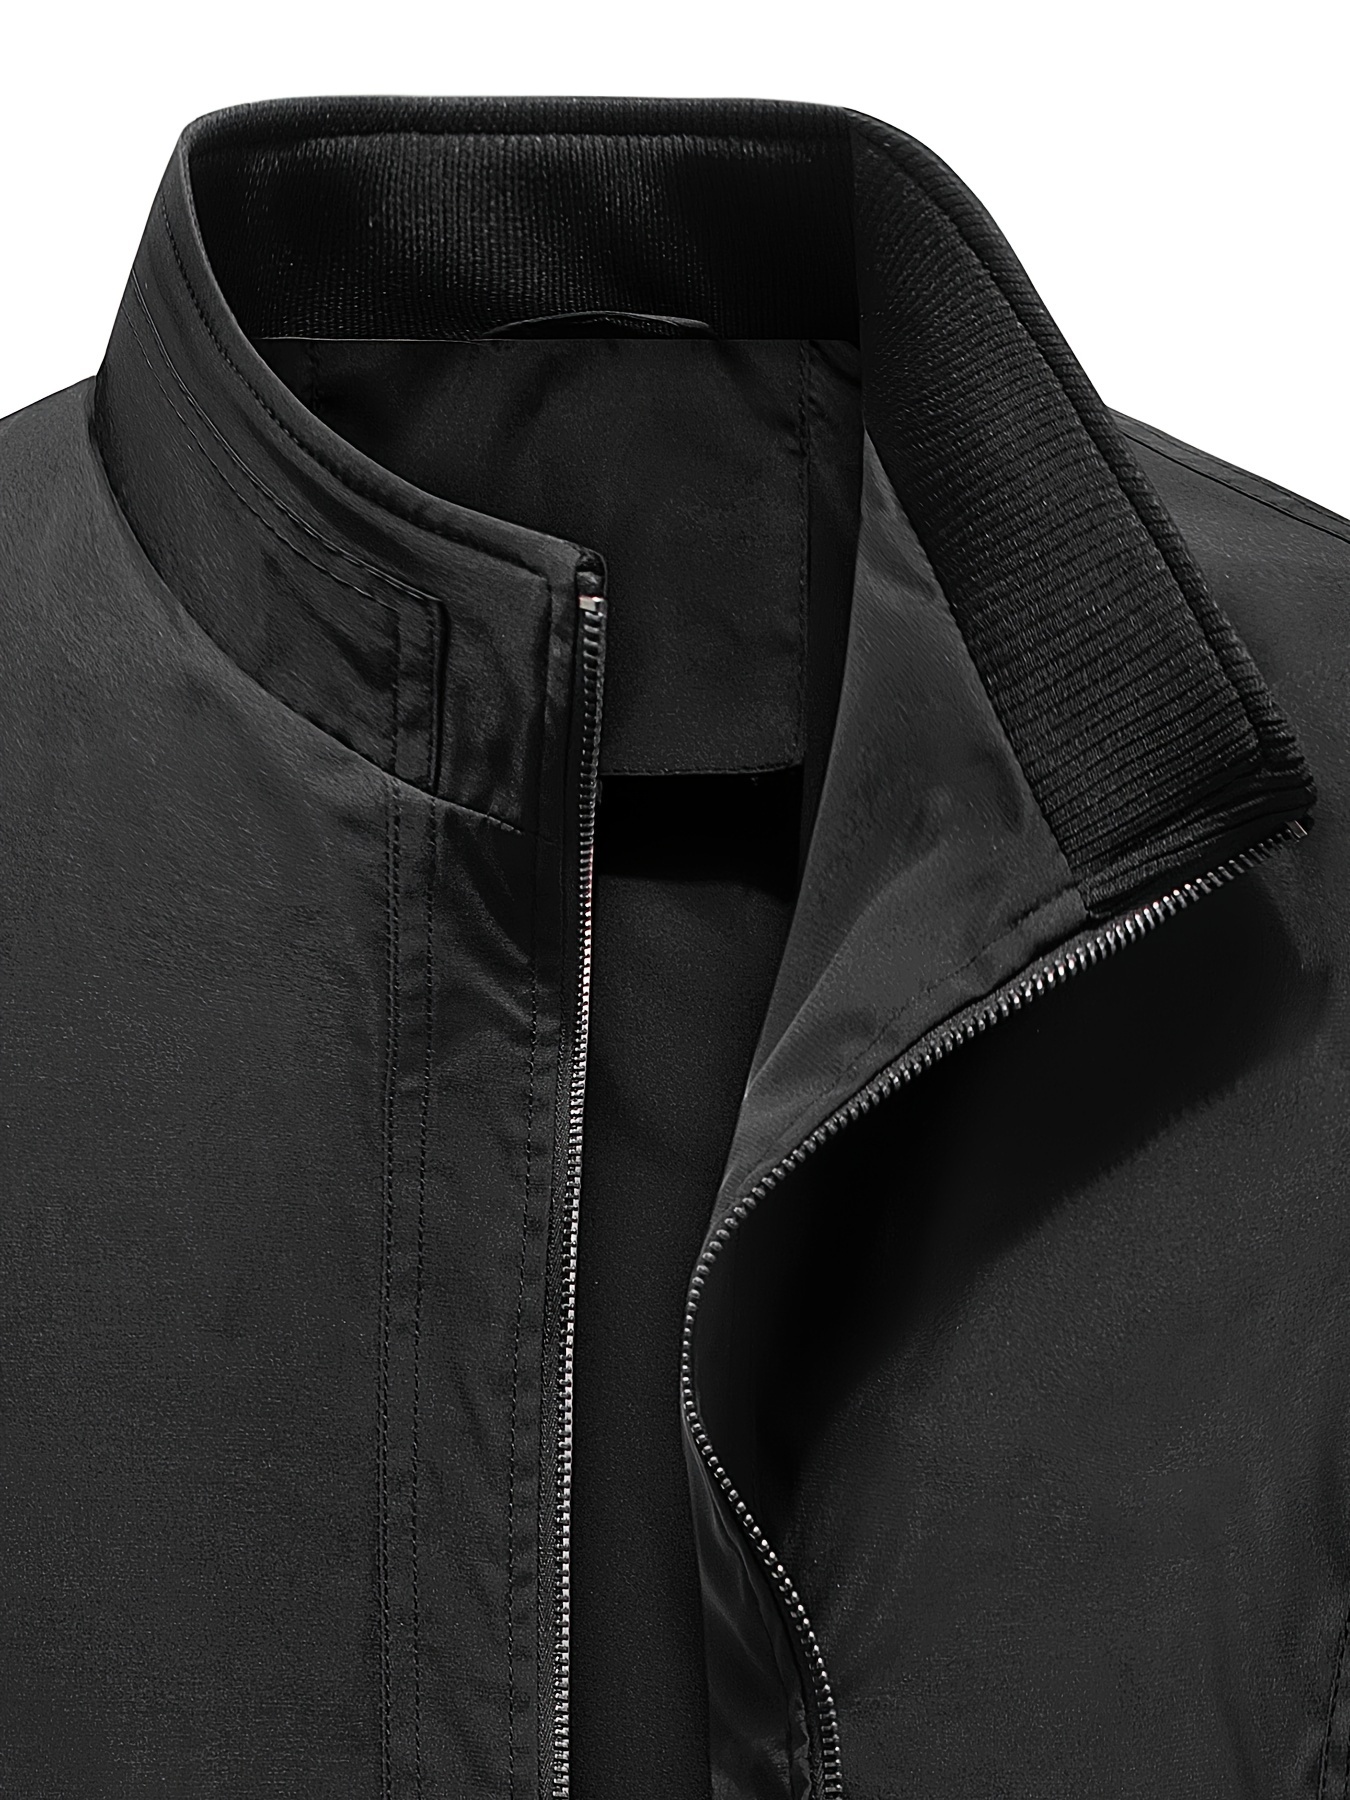 mens casual zip up jacket chic all match stand collar coat